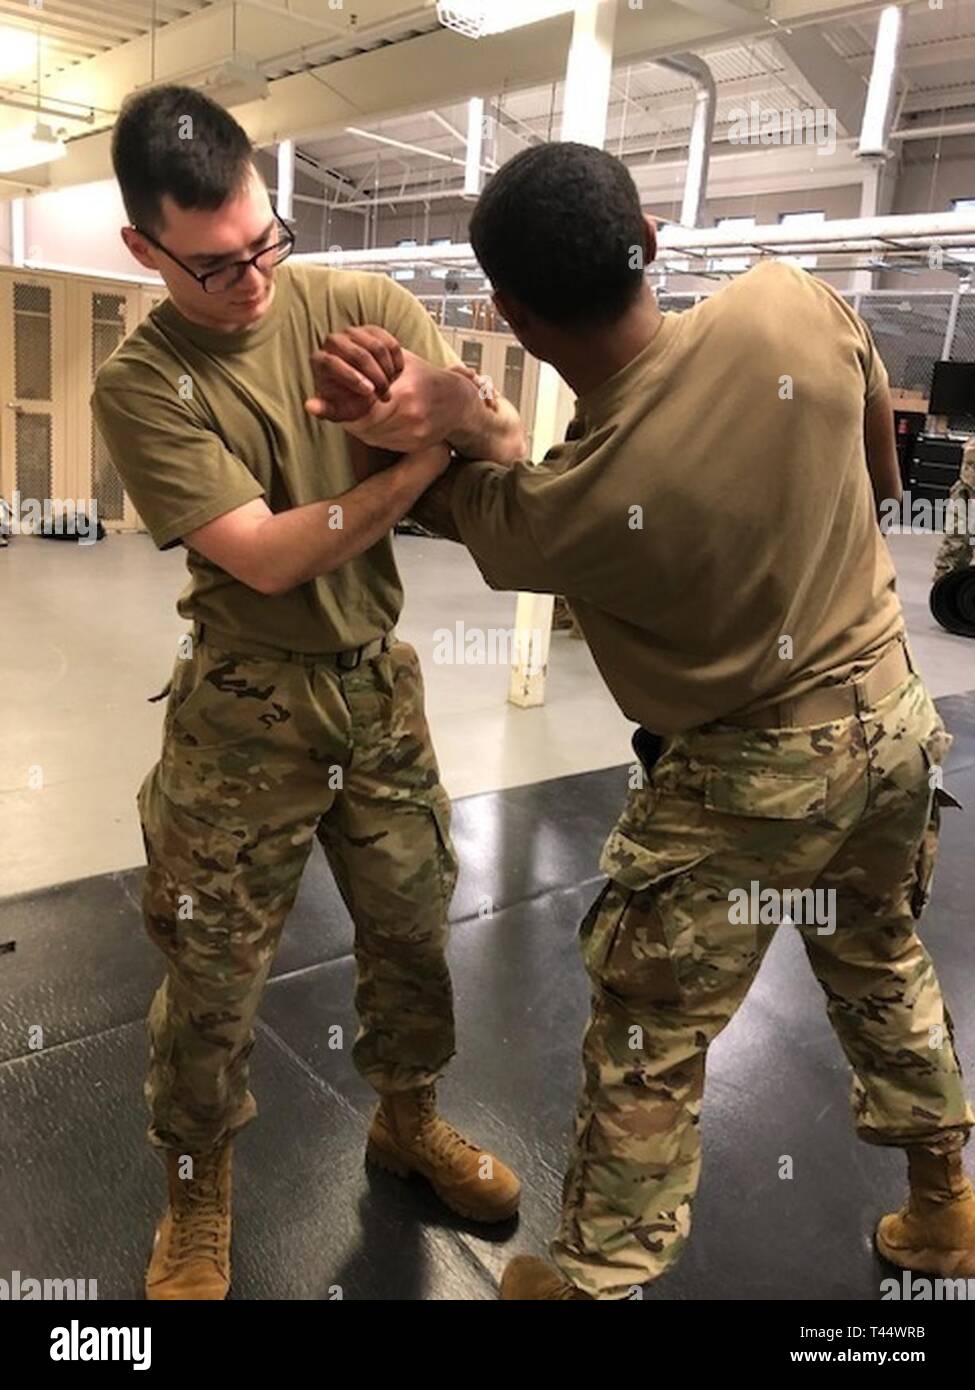 PVT Jared Whiting and PV2 Dorian Rivera, both Military Police Soldiers with the 194th Military Police Company, 716th Military Police Battalion, practice their mechanical arm holds as an effective way to subdue a non-compliant subject. Stock Photo